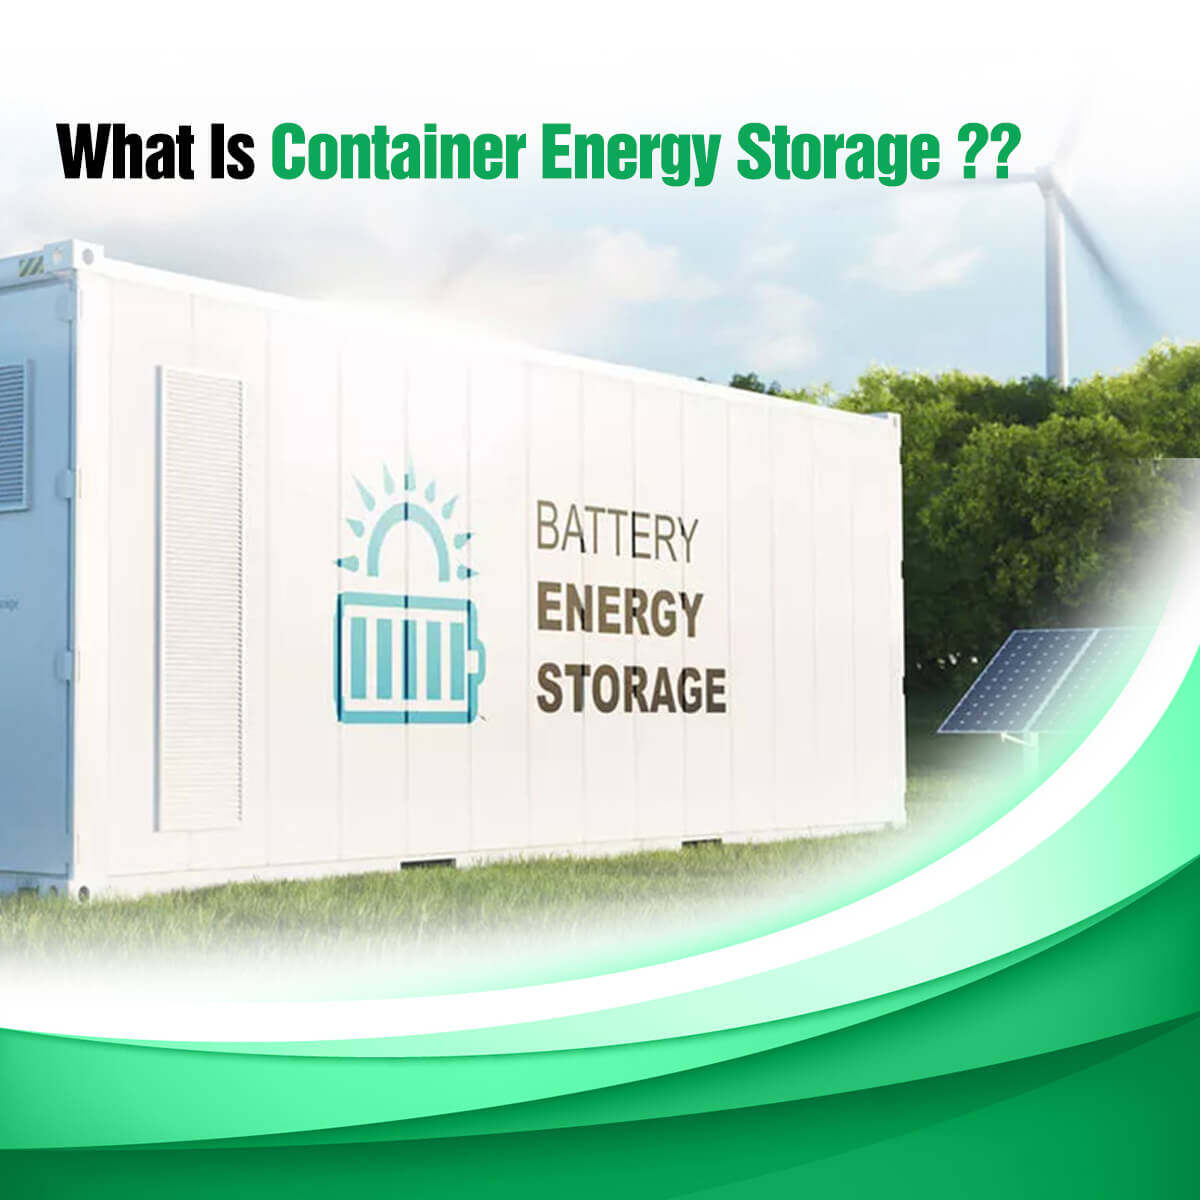 What Is Container Energy Storage